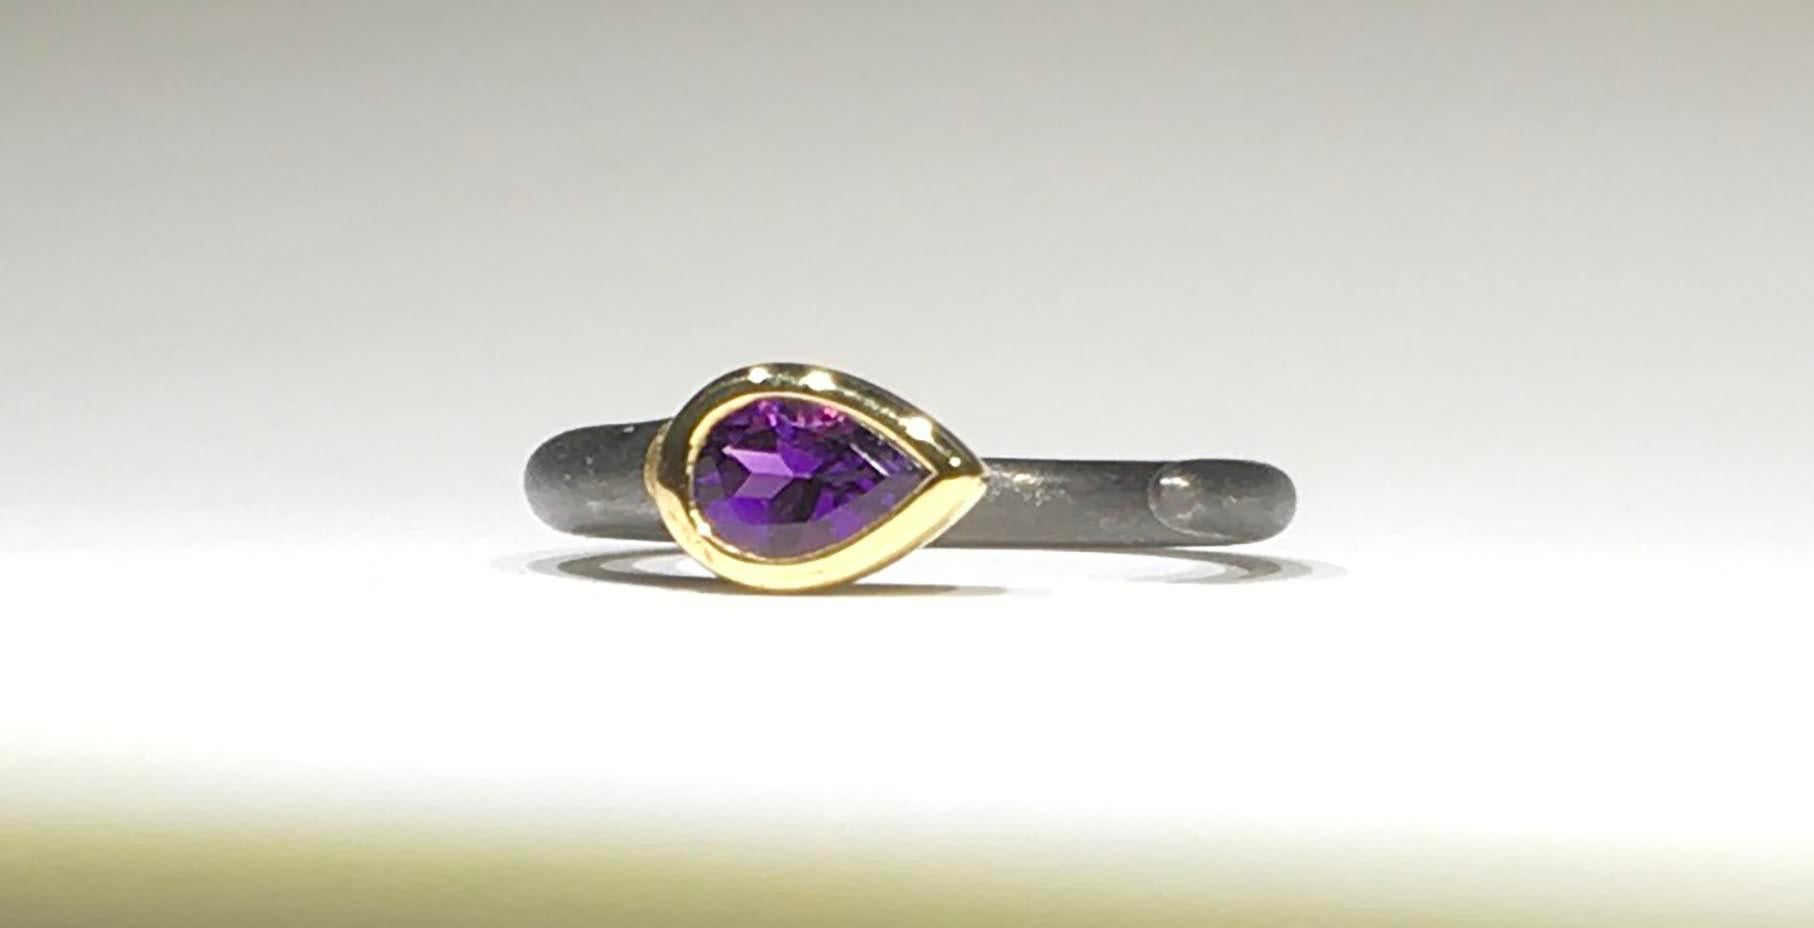 A Blackened Brushed Silver Ring with a Gold Plated Setting featuring a Pear Shaped Amethyst of 0.44 Carats. The 6.5 Gram Silver Band is a Size 7 USA and can easily be changed. 

Originally from San Diego, California, Kary Adam lived in the “Gem